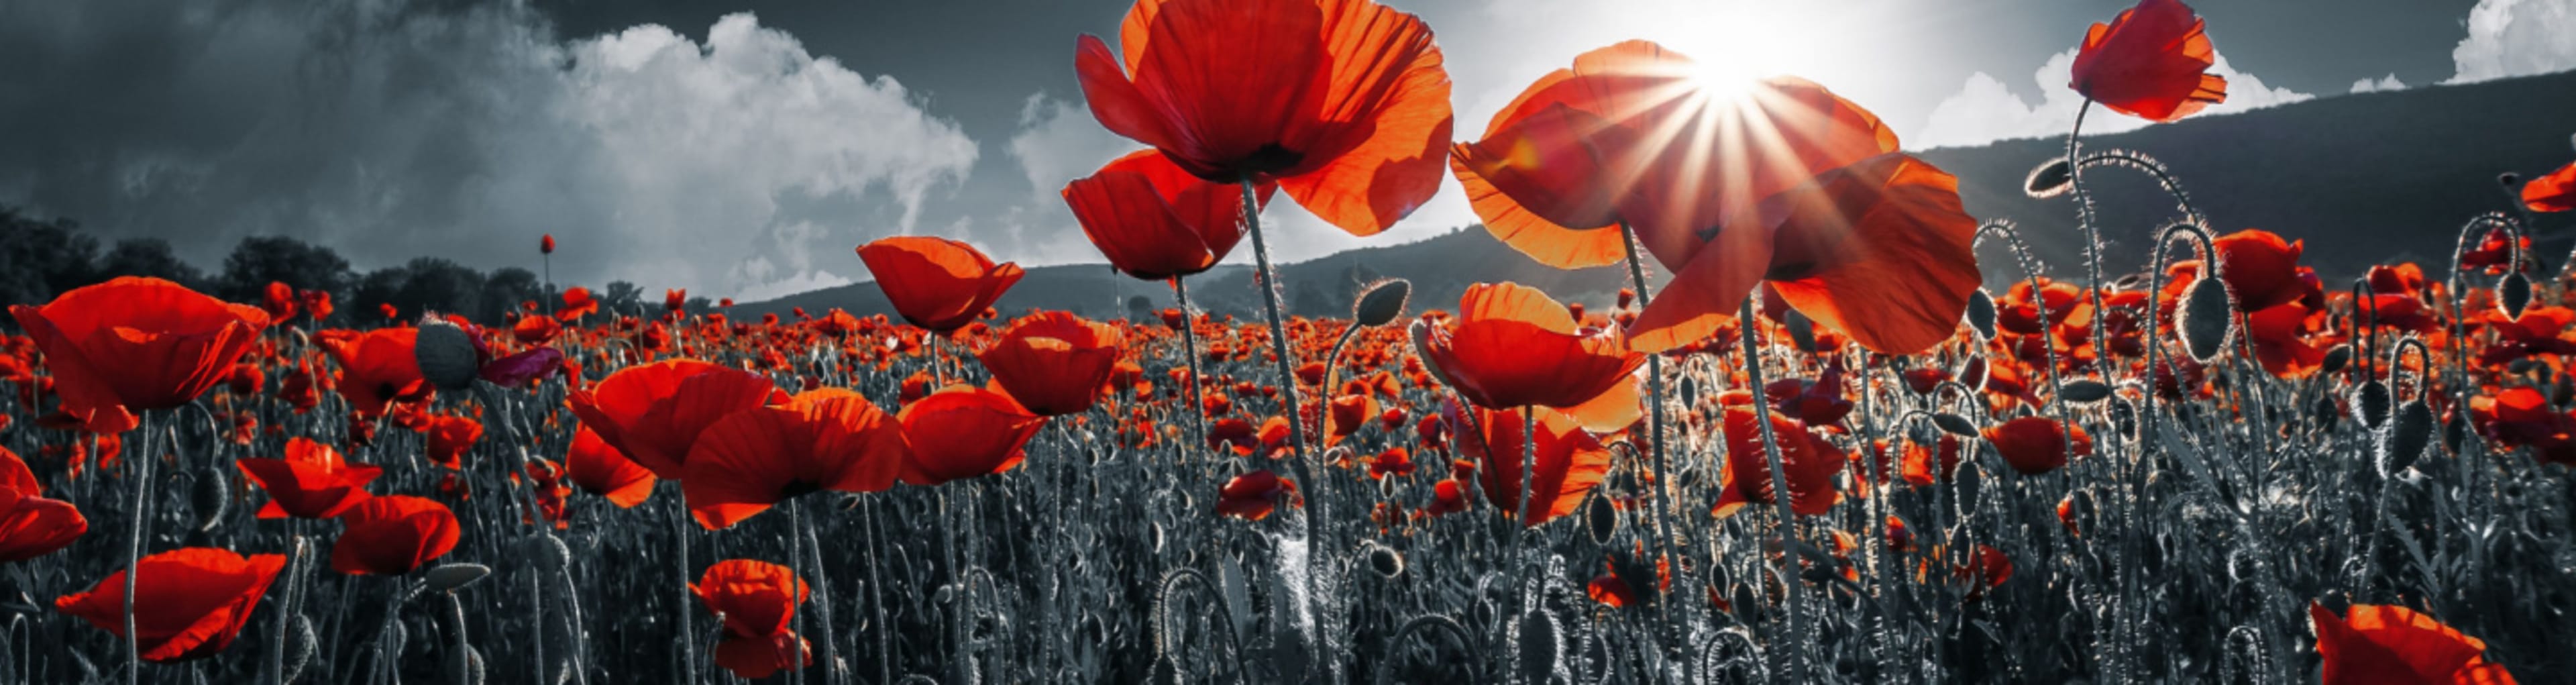 Things to do on Remembrance Day in London